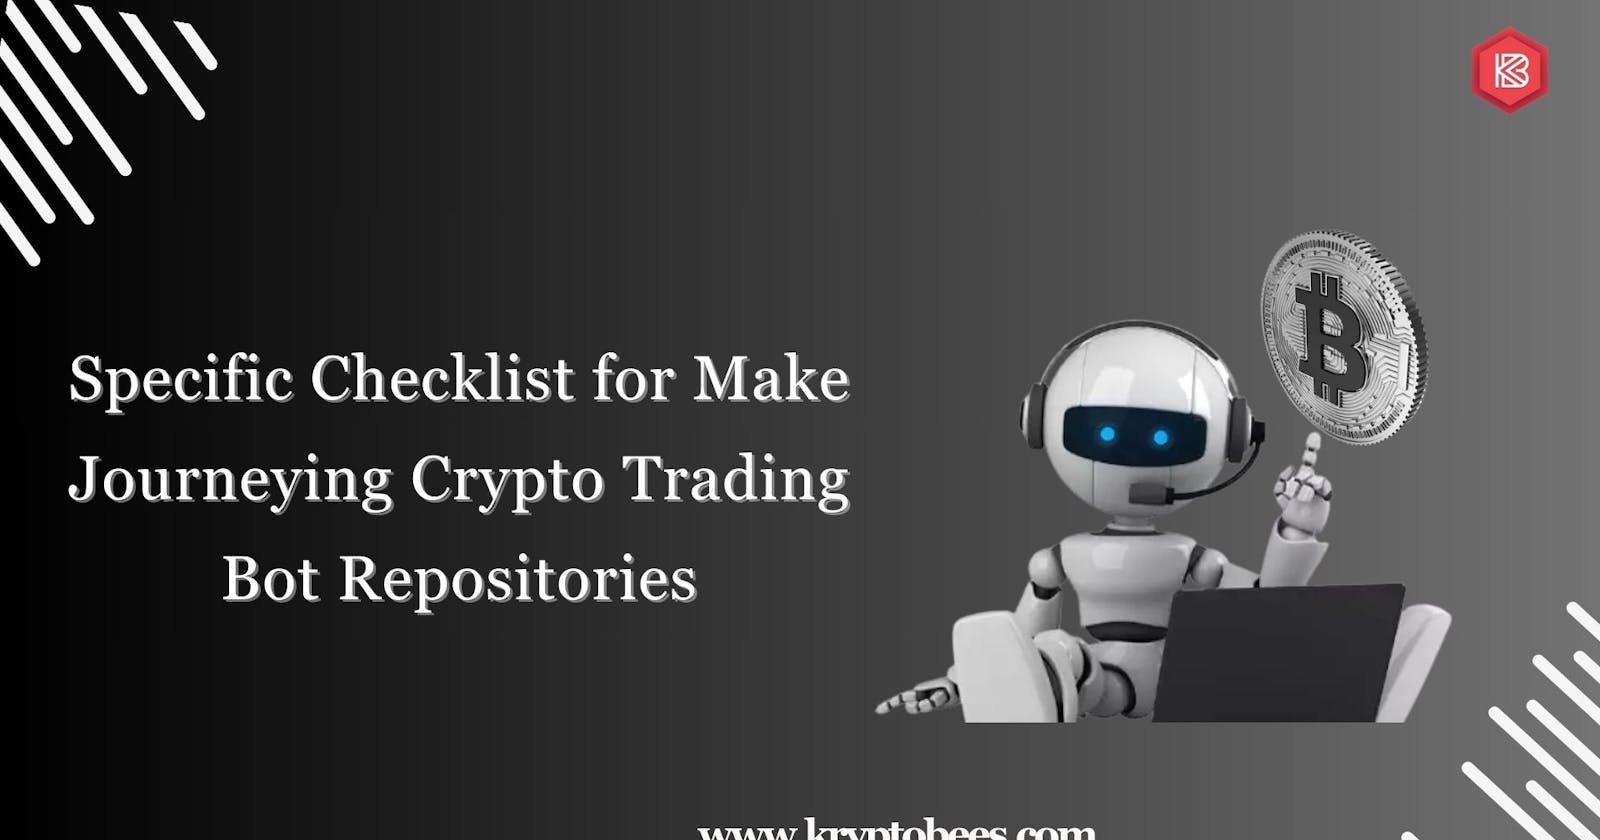 Specific Checklist for Make Journeying Crypto Trading Bot Repositories